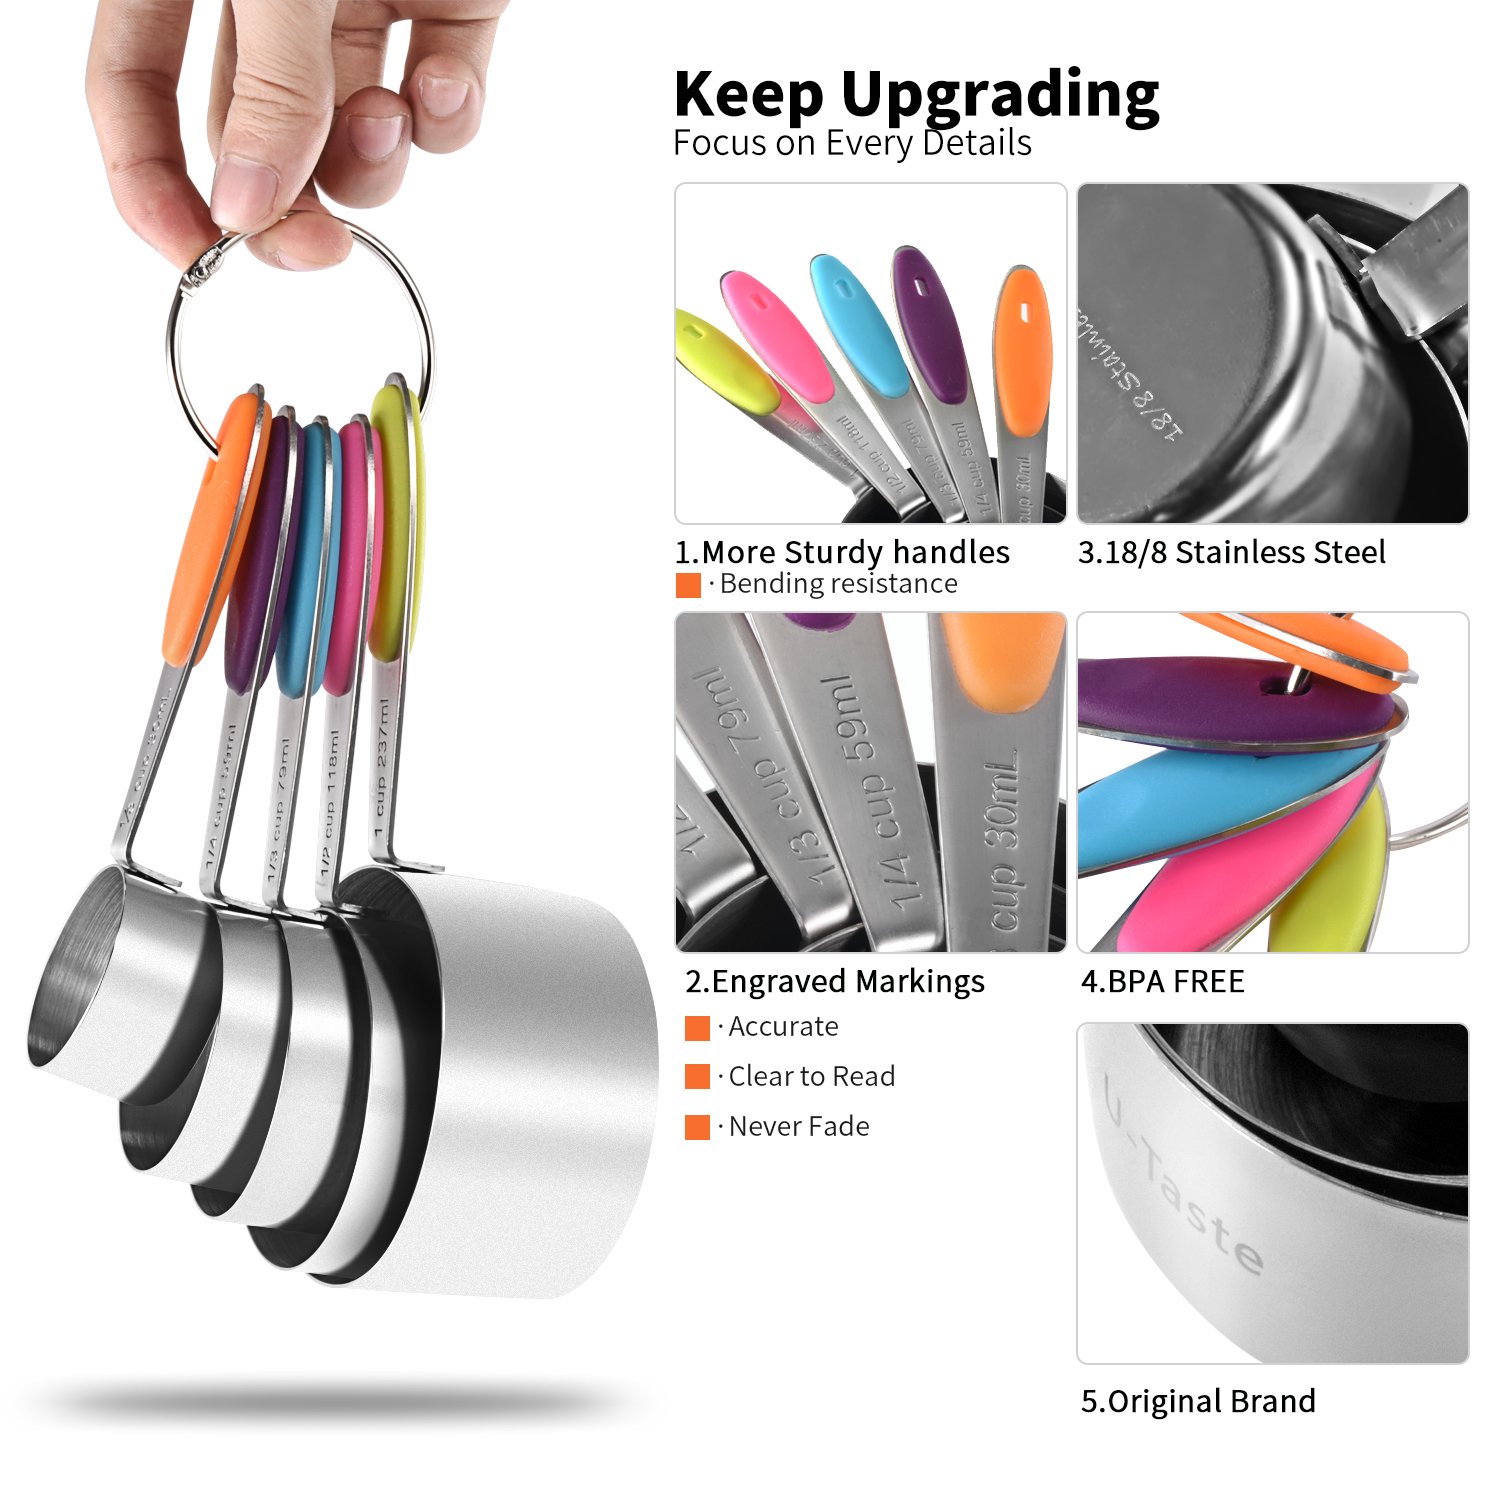 Amazon Choice 12 Piece Measuring Cups and Spoons Set in 18/8 Stainless Steel : 7 Measuring Cups & 5 Measuring Spoons